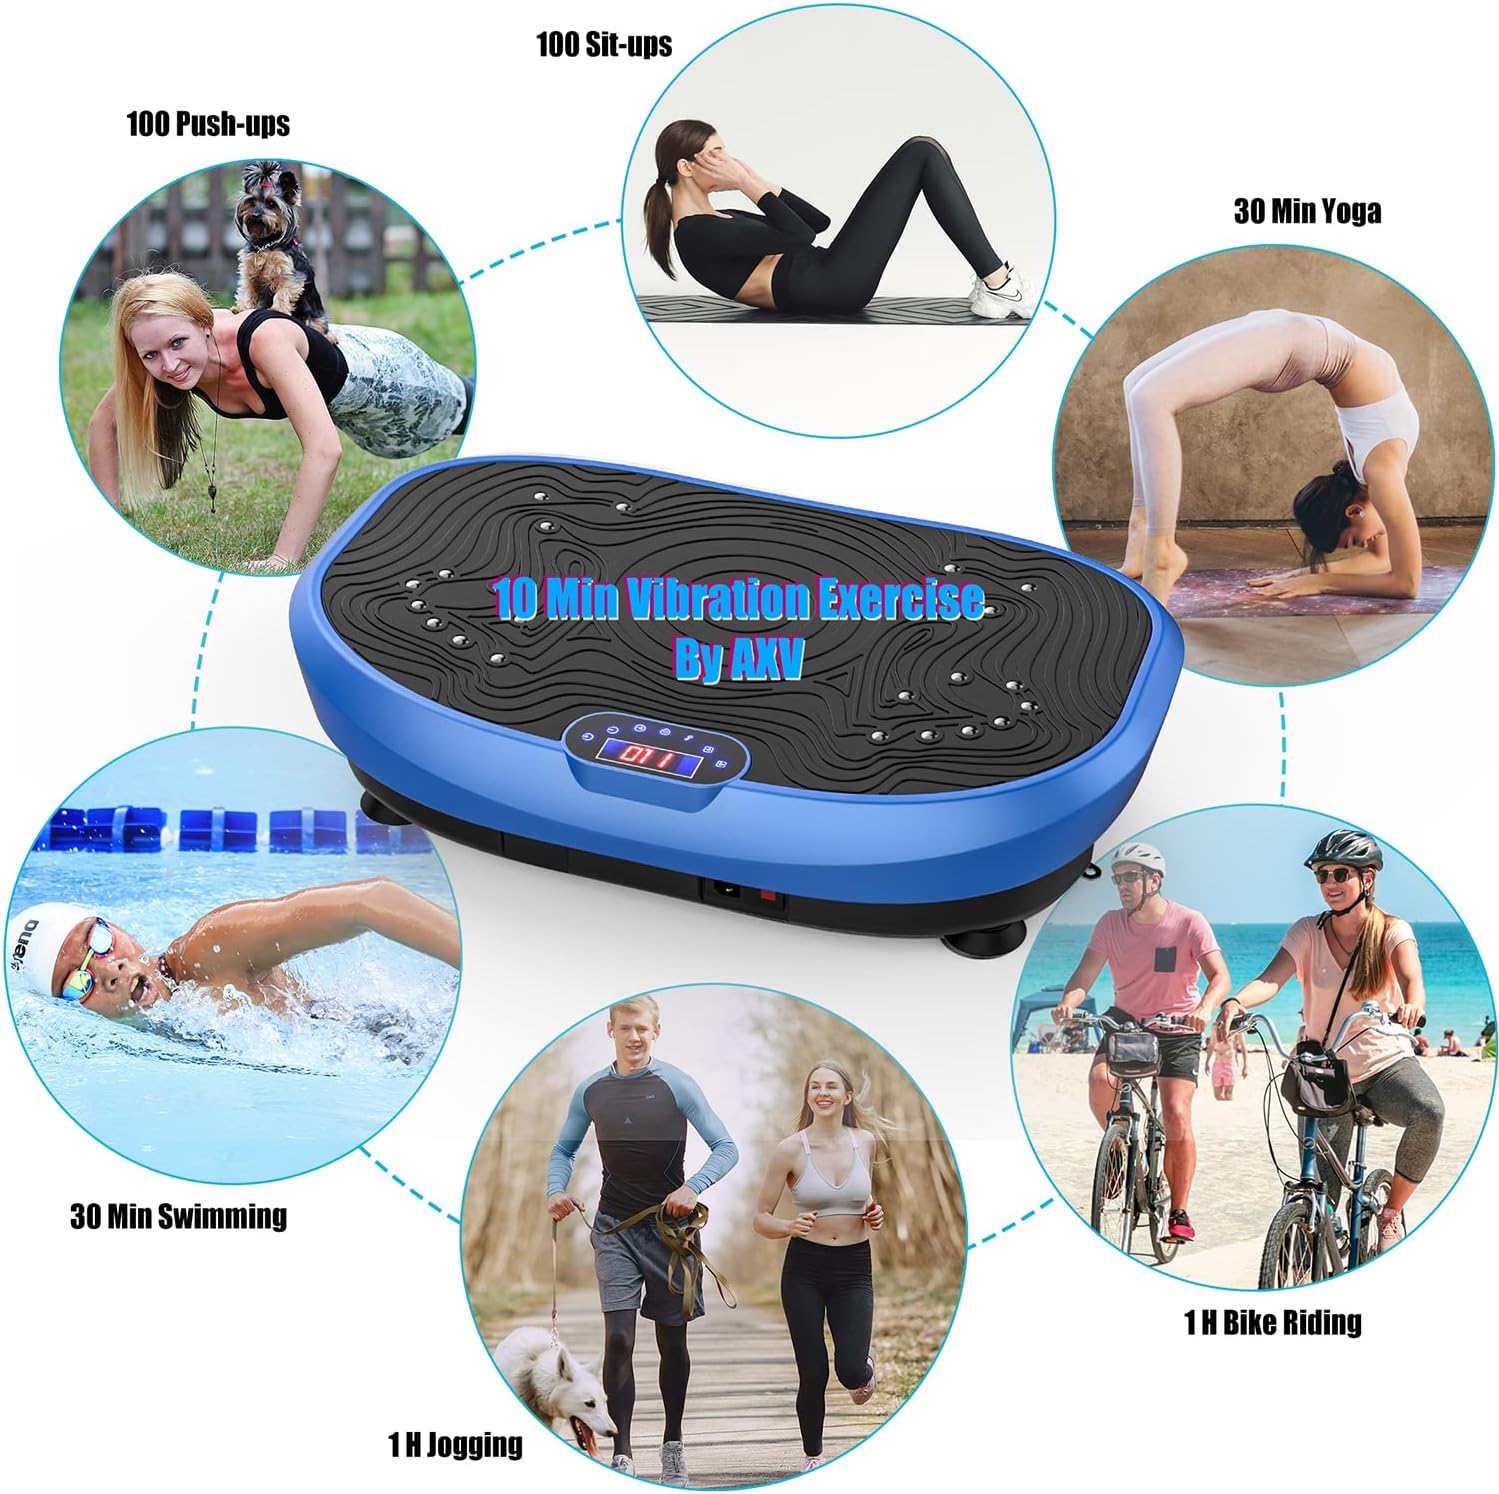 Vibration Plate Exercise Machine Whole Body Workout Vibrate Fitness Platform Lymphatic Drainage Machine for Weight Loss Shaping Toning Wellness Home Gyms Workout for Women Men